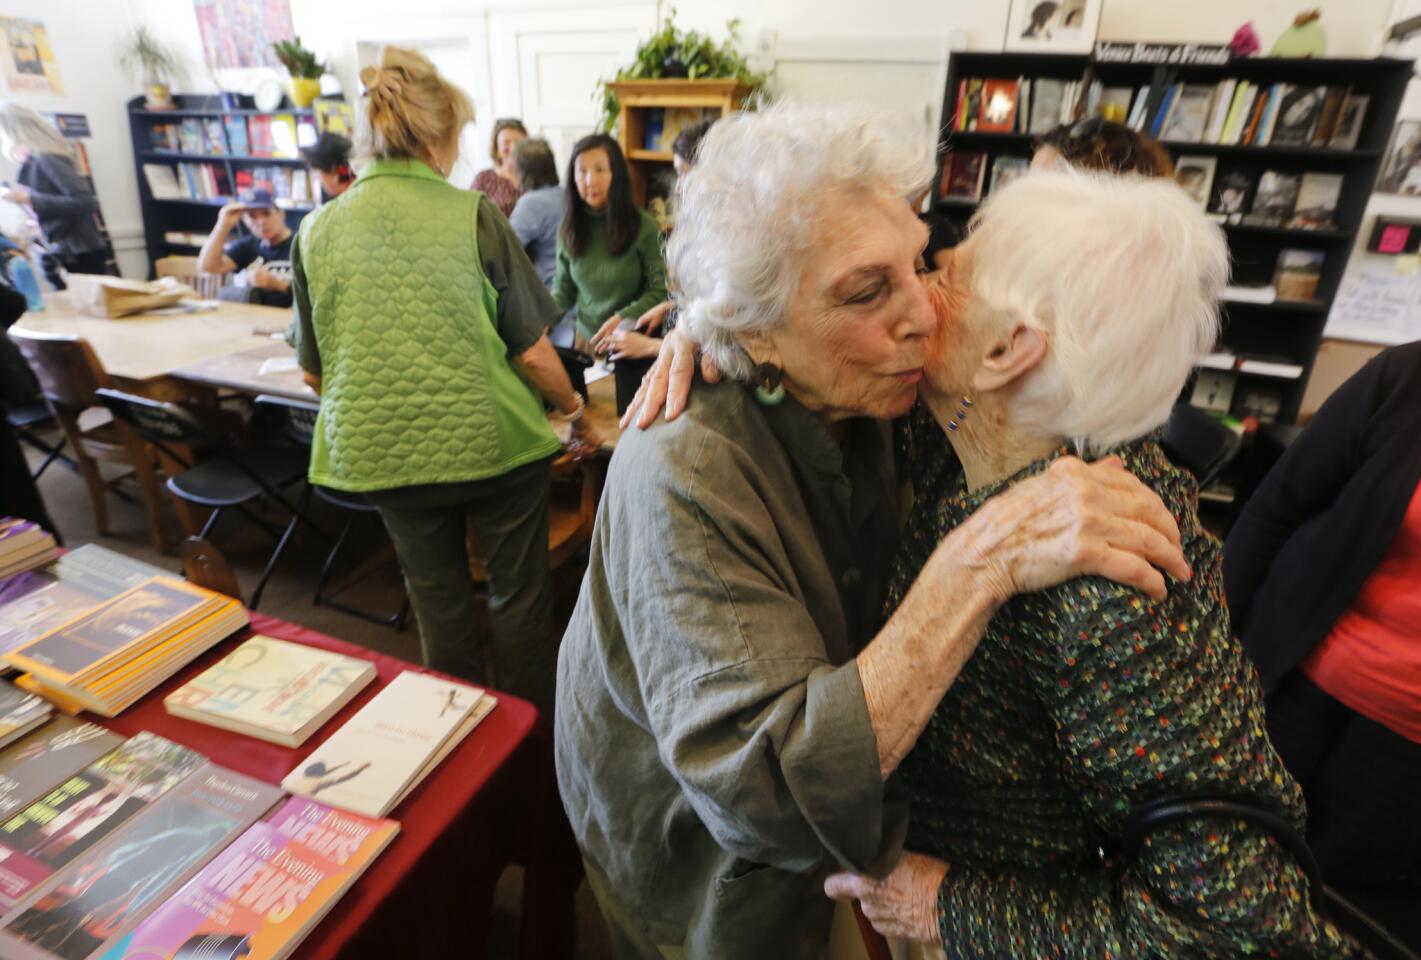 Esther Morrison and Selma Benjamin hug each other at the end of meeting of the Green Poets of Venice. The group has been meeting at the Beyond Baroque art center on Tuesday mornings for the past 14 years.